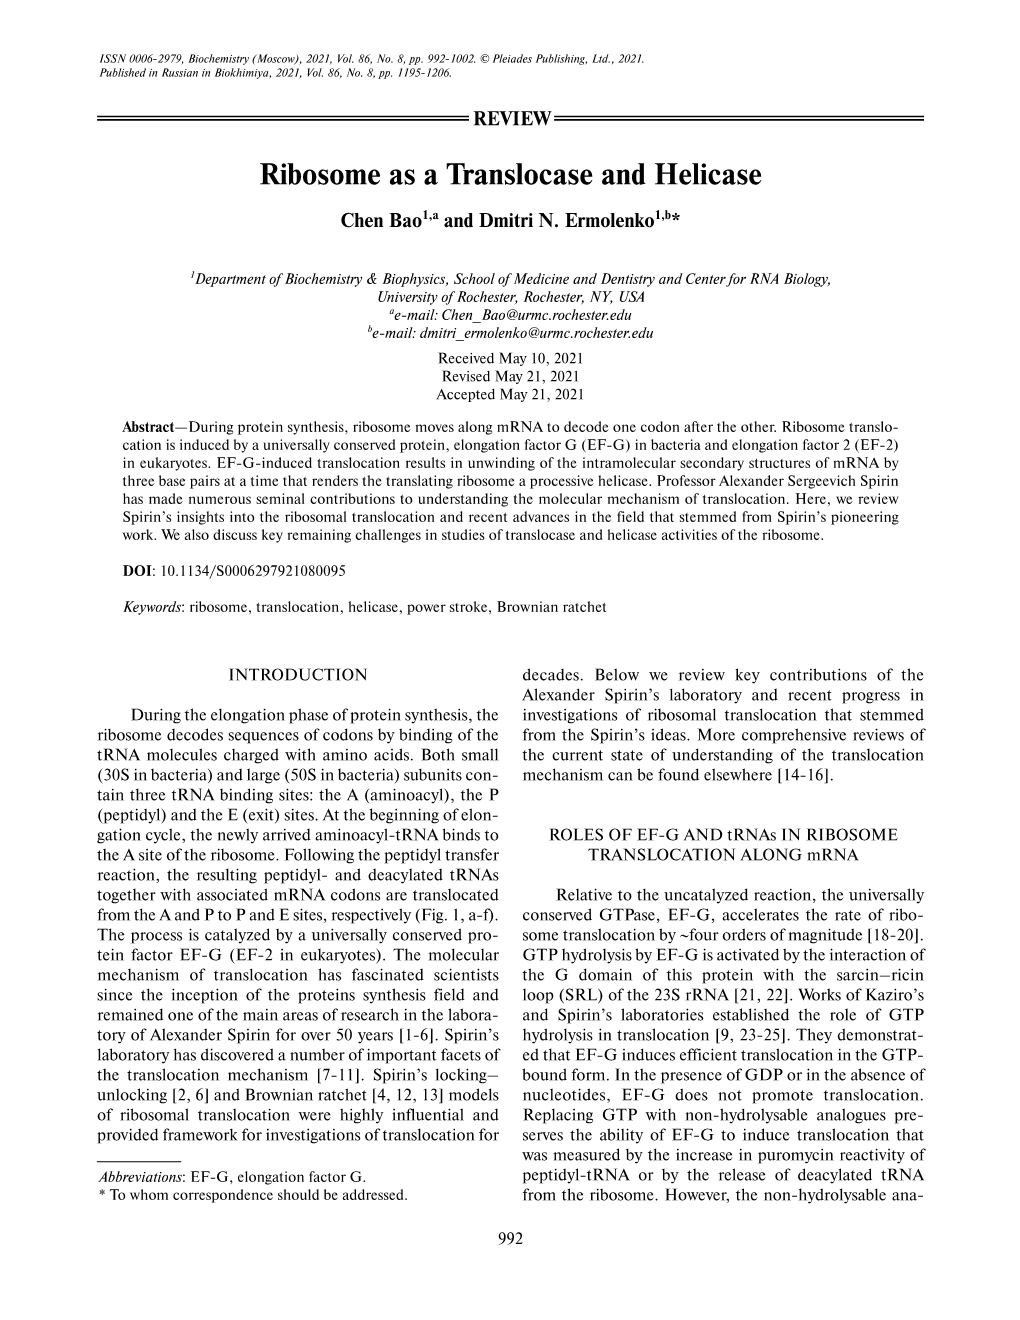 Ribosome As a Translocase and Helicase